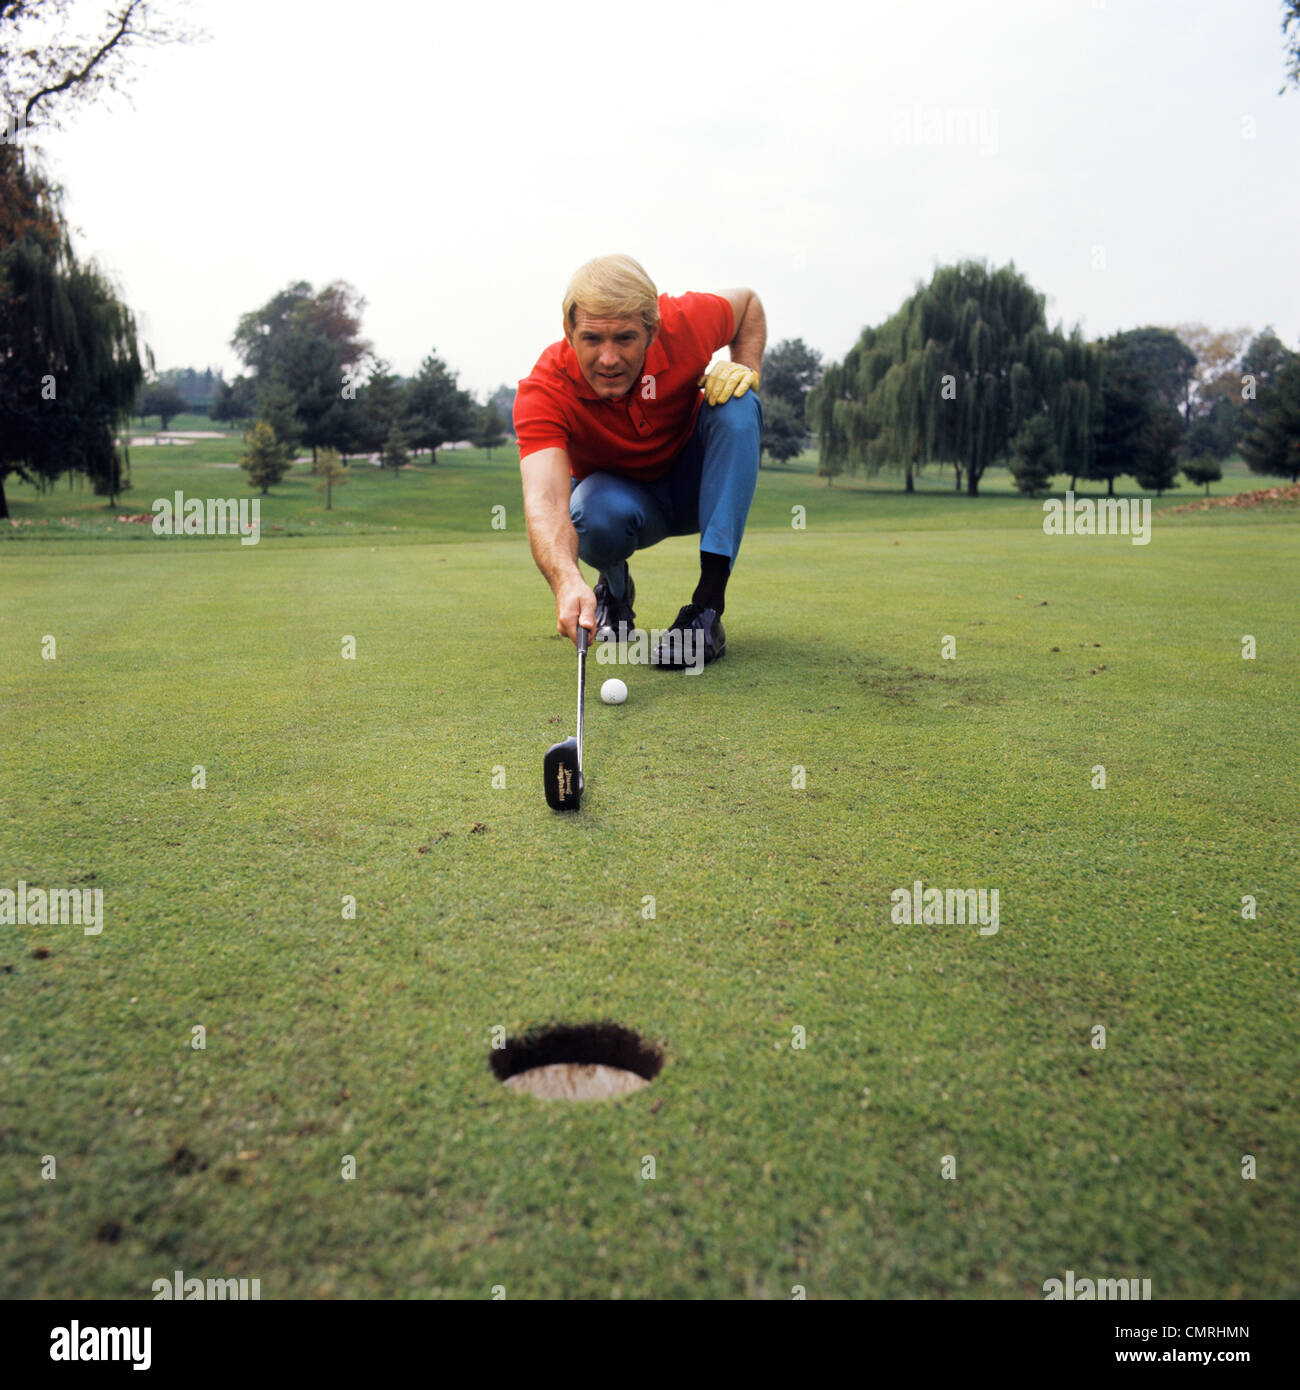 1970s BLOND MAN PLAYING GOLF CROUCHING LINING UP SHOT TO HOLE ON PUTTING GREEN Stock Photo